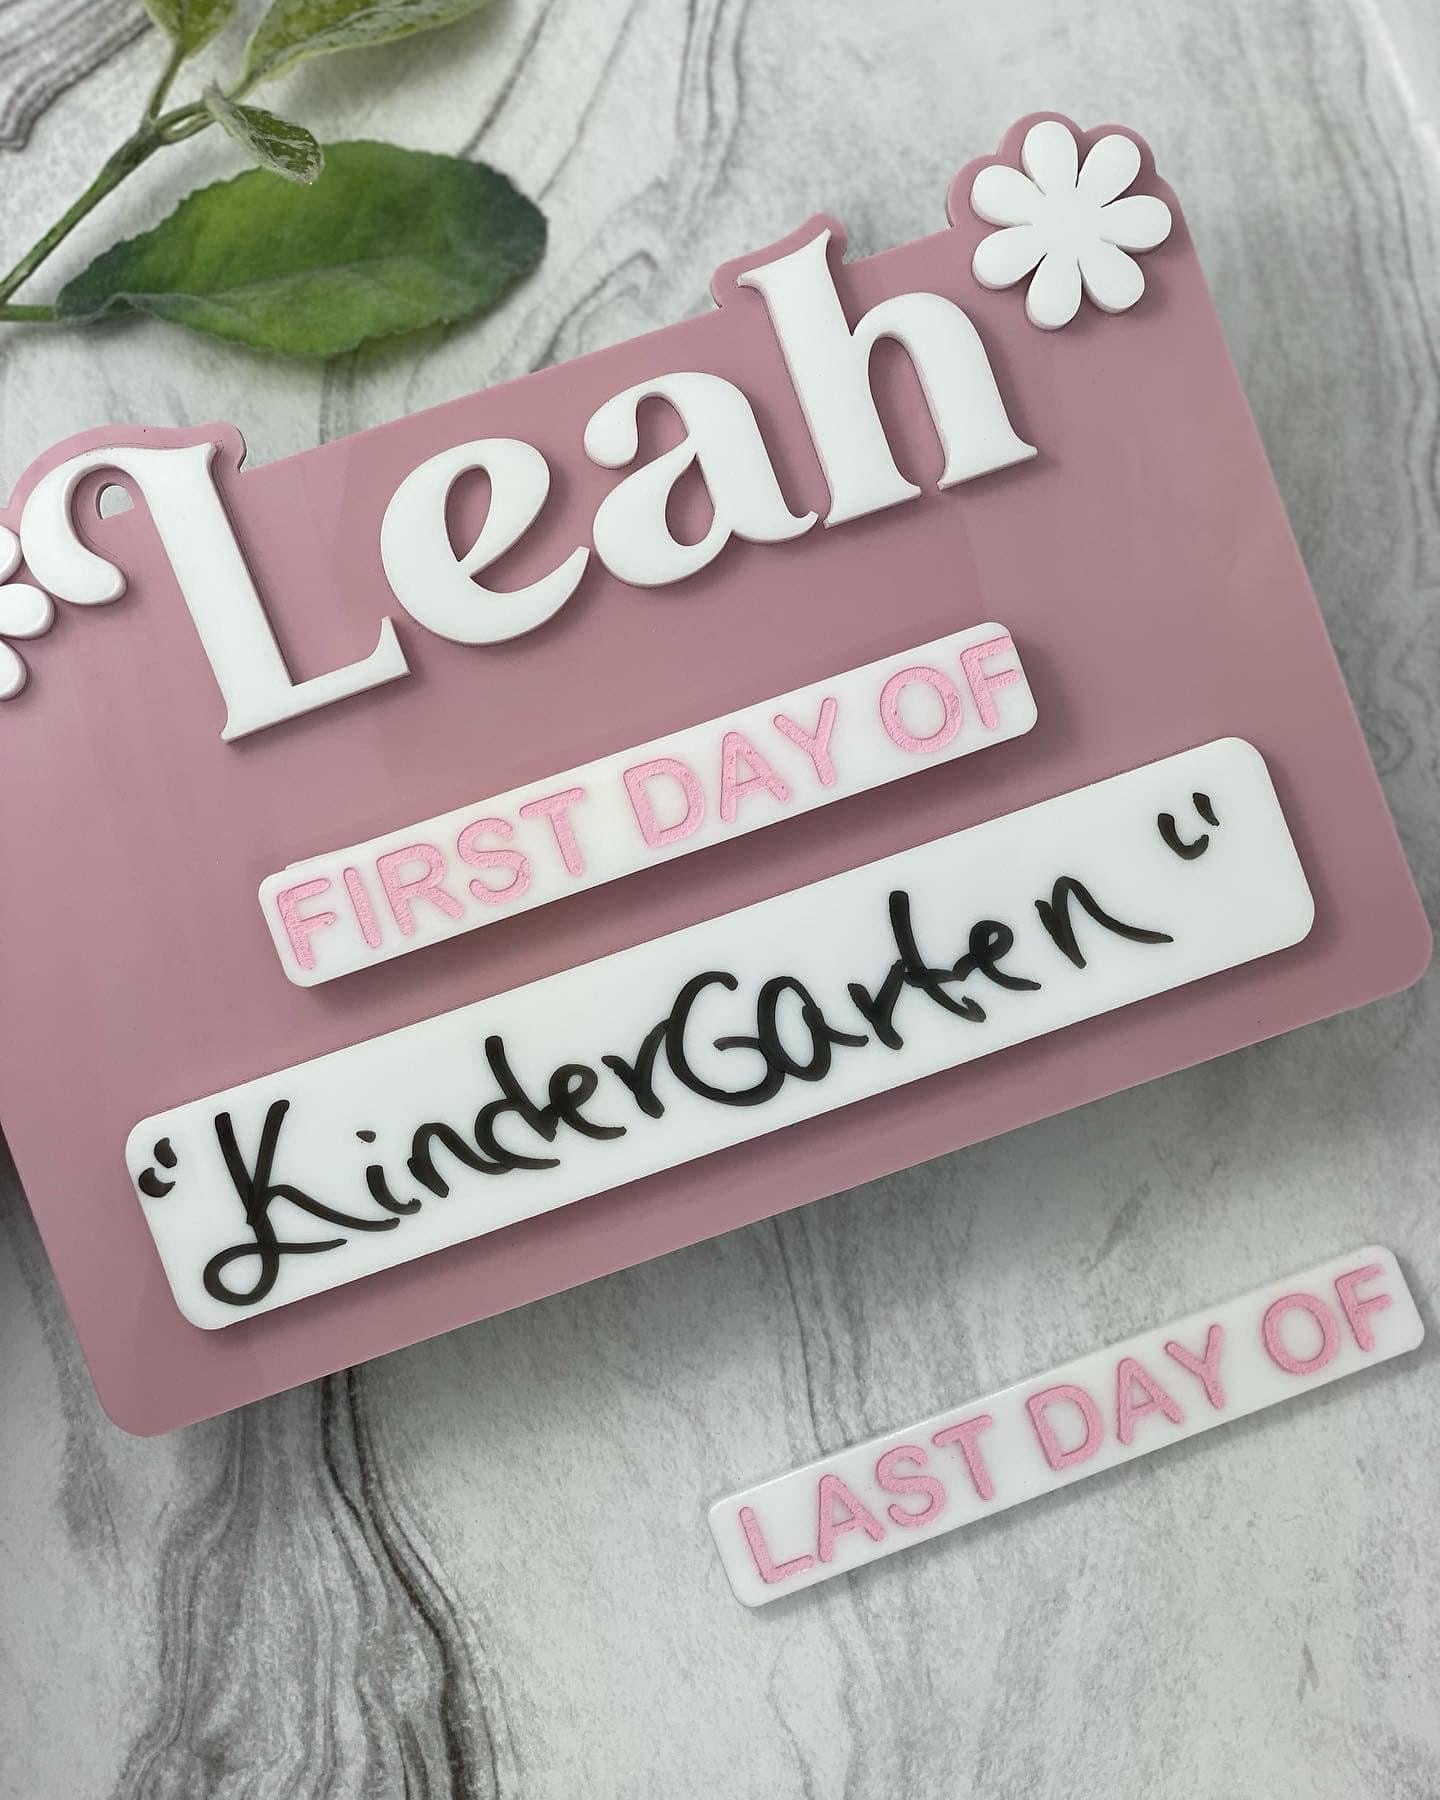 Back to school sign, Last day of school, kids pictures, wood sign, acrylic sign, kindergarten boards